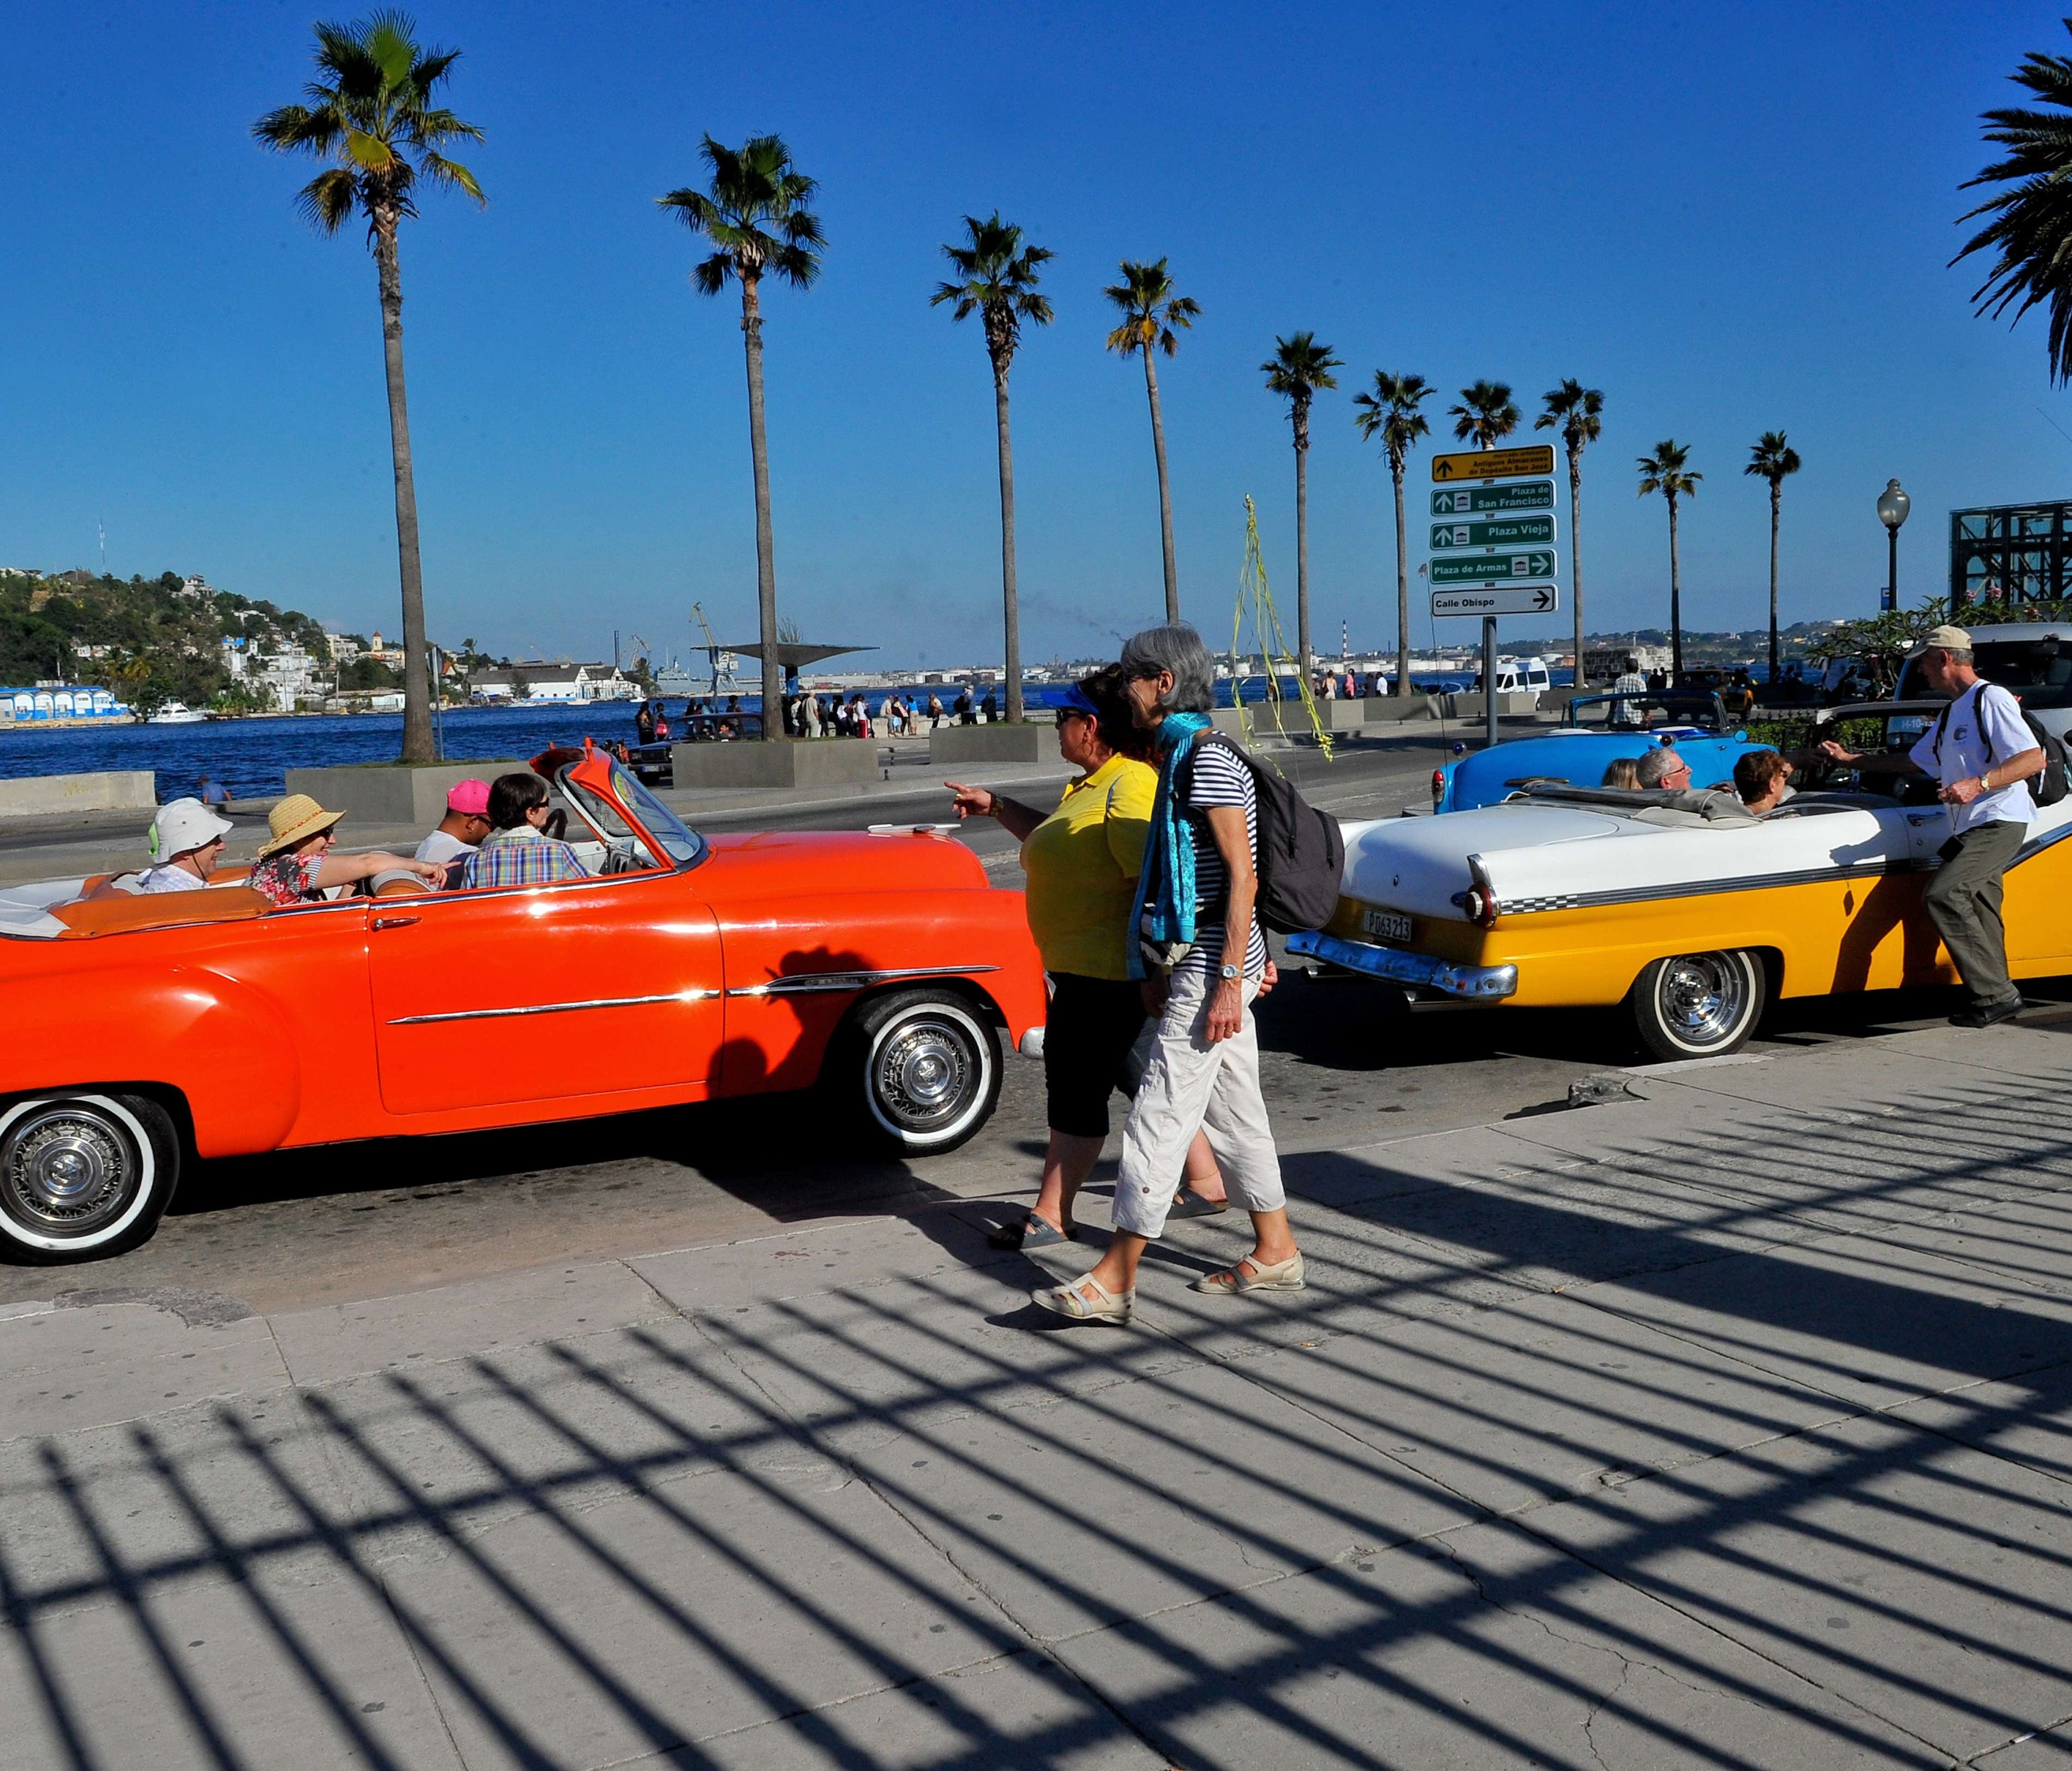 Tourists from the United States are seen in old American cars in Havana, on April 6, 2015.